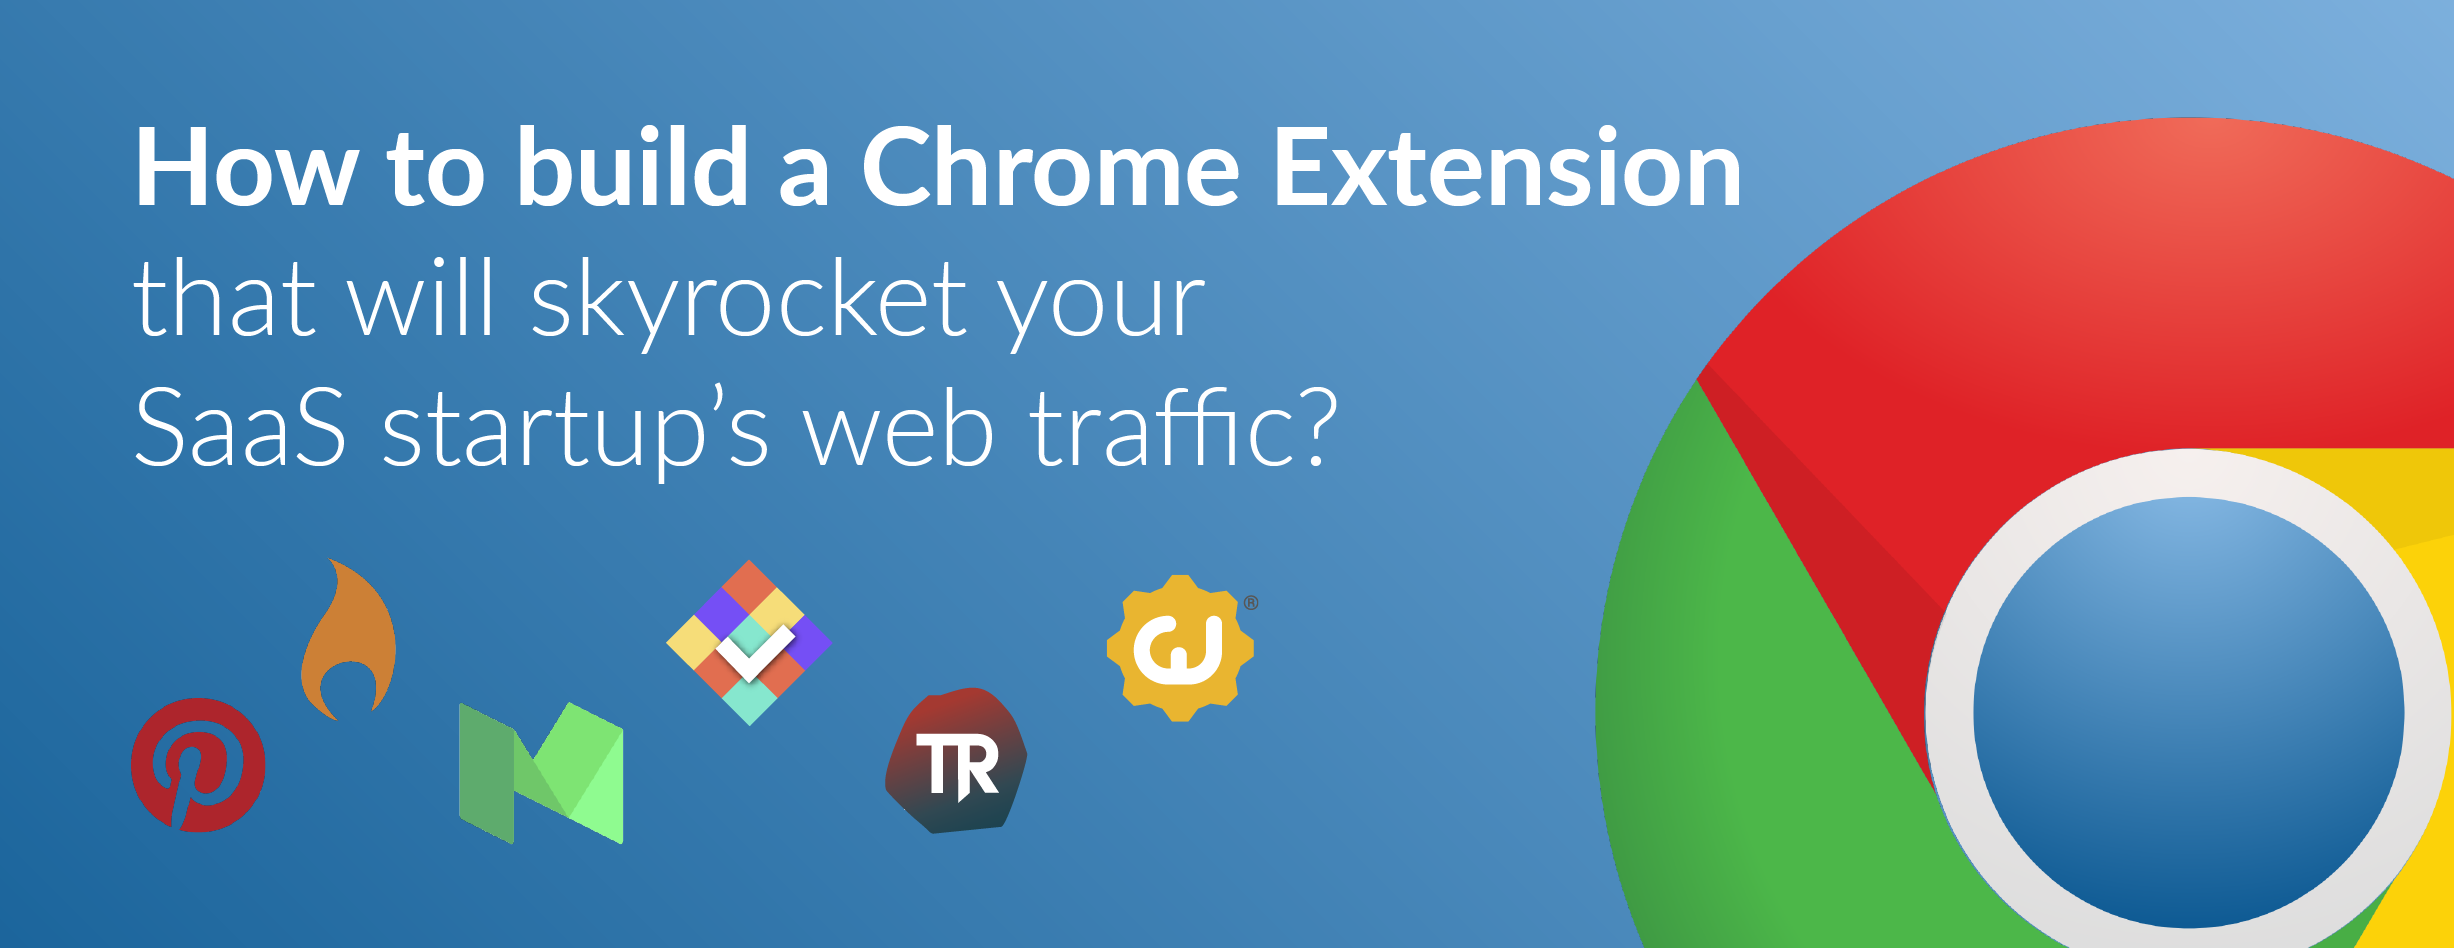 7 Google Chrome extensions worth downloading - Marvellous